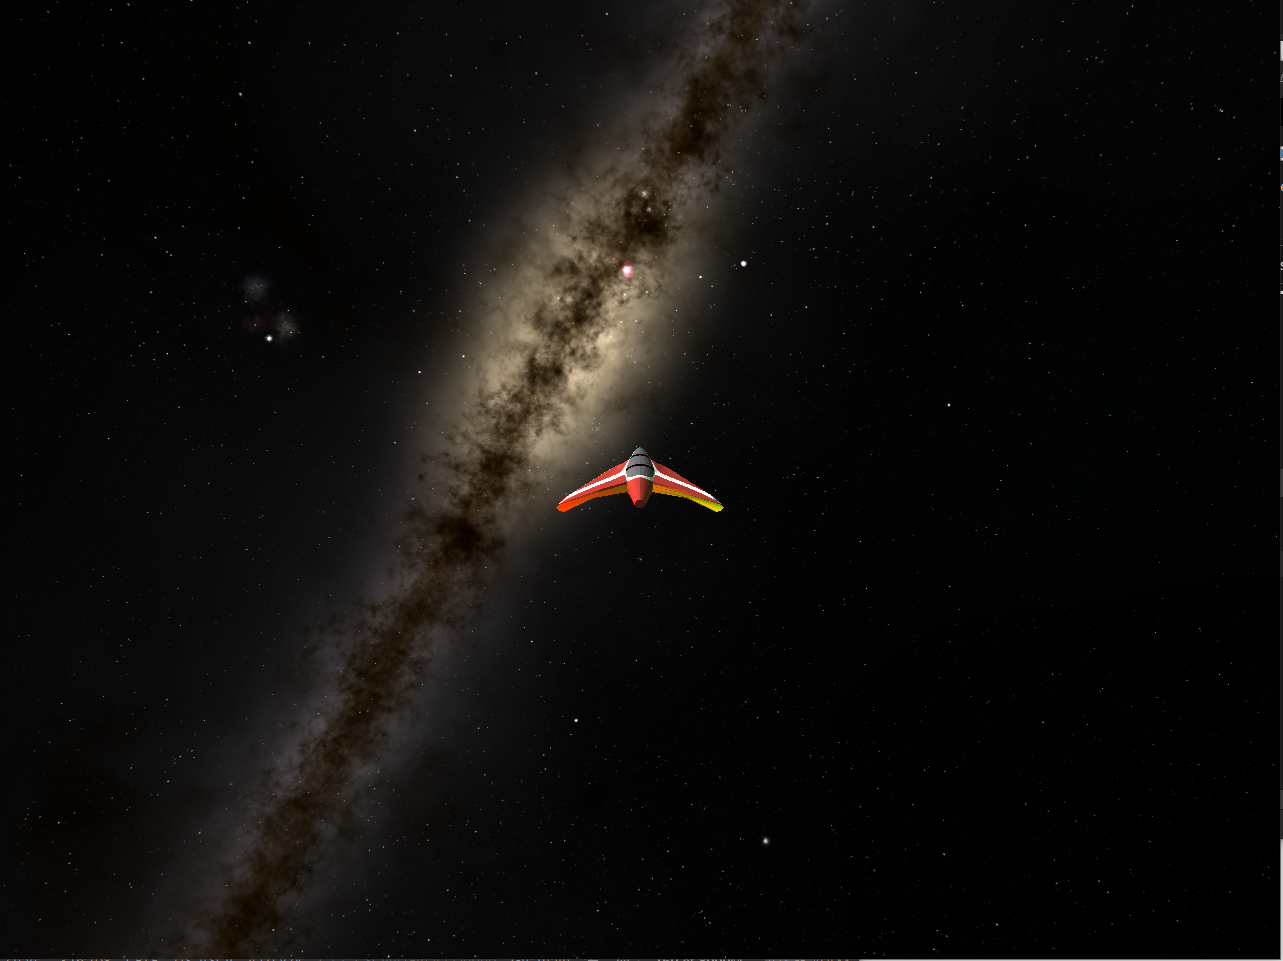 Ship flying in space, with lighting